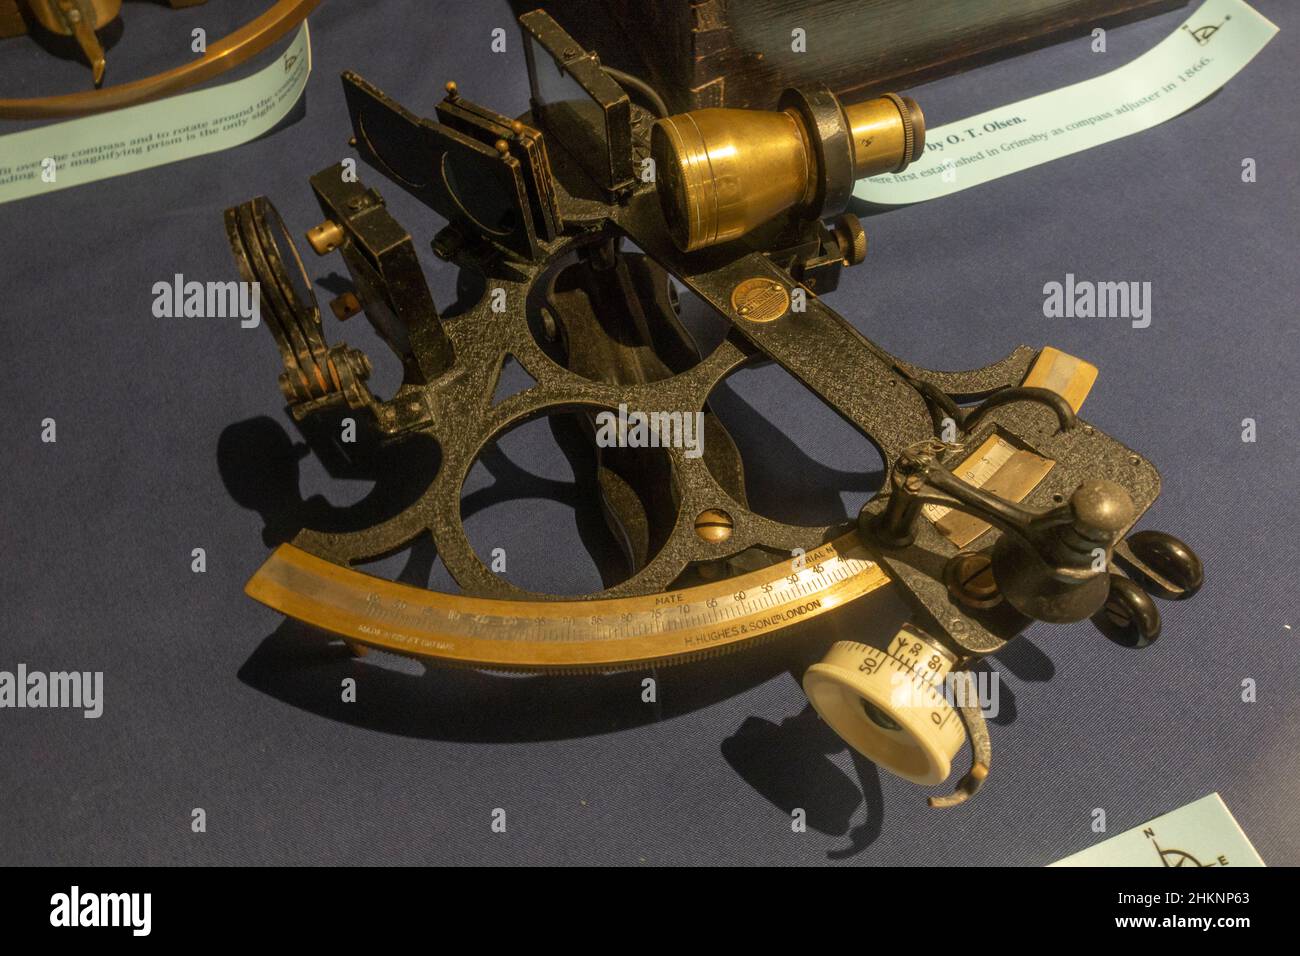 A sextant by Henry Hughes & Son used to measure angles at sea on display in the Grimsby Fishing Heritage Centre, Grimsby, UK. Stock Photo